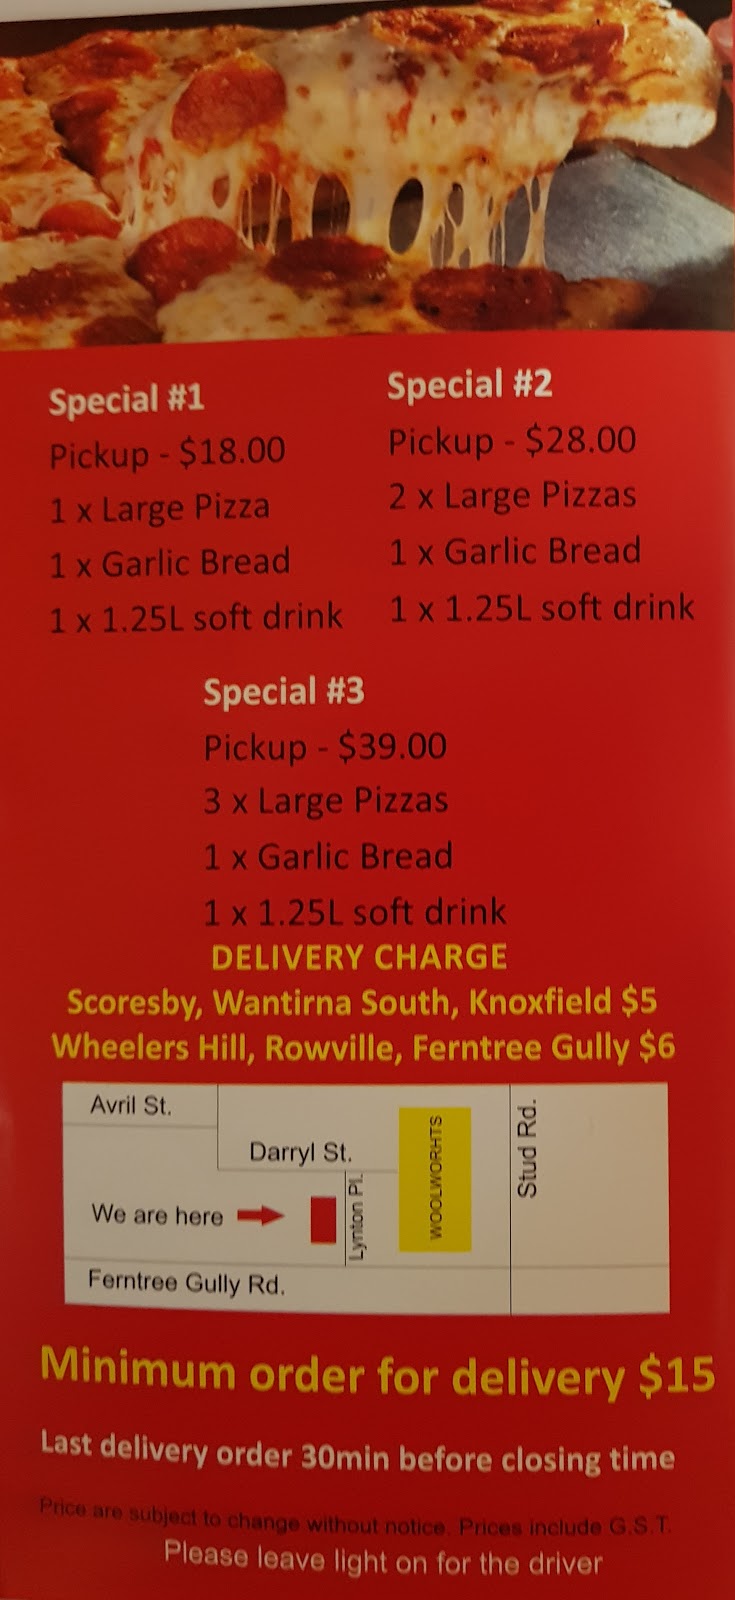 Pizza Plus (Delivery & Takeaway) | meal delivery | 3/5 Lynton Pl, Scoresby VIC 3179, Australia | 0397632099 OR +61 3 9763 2099